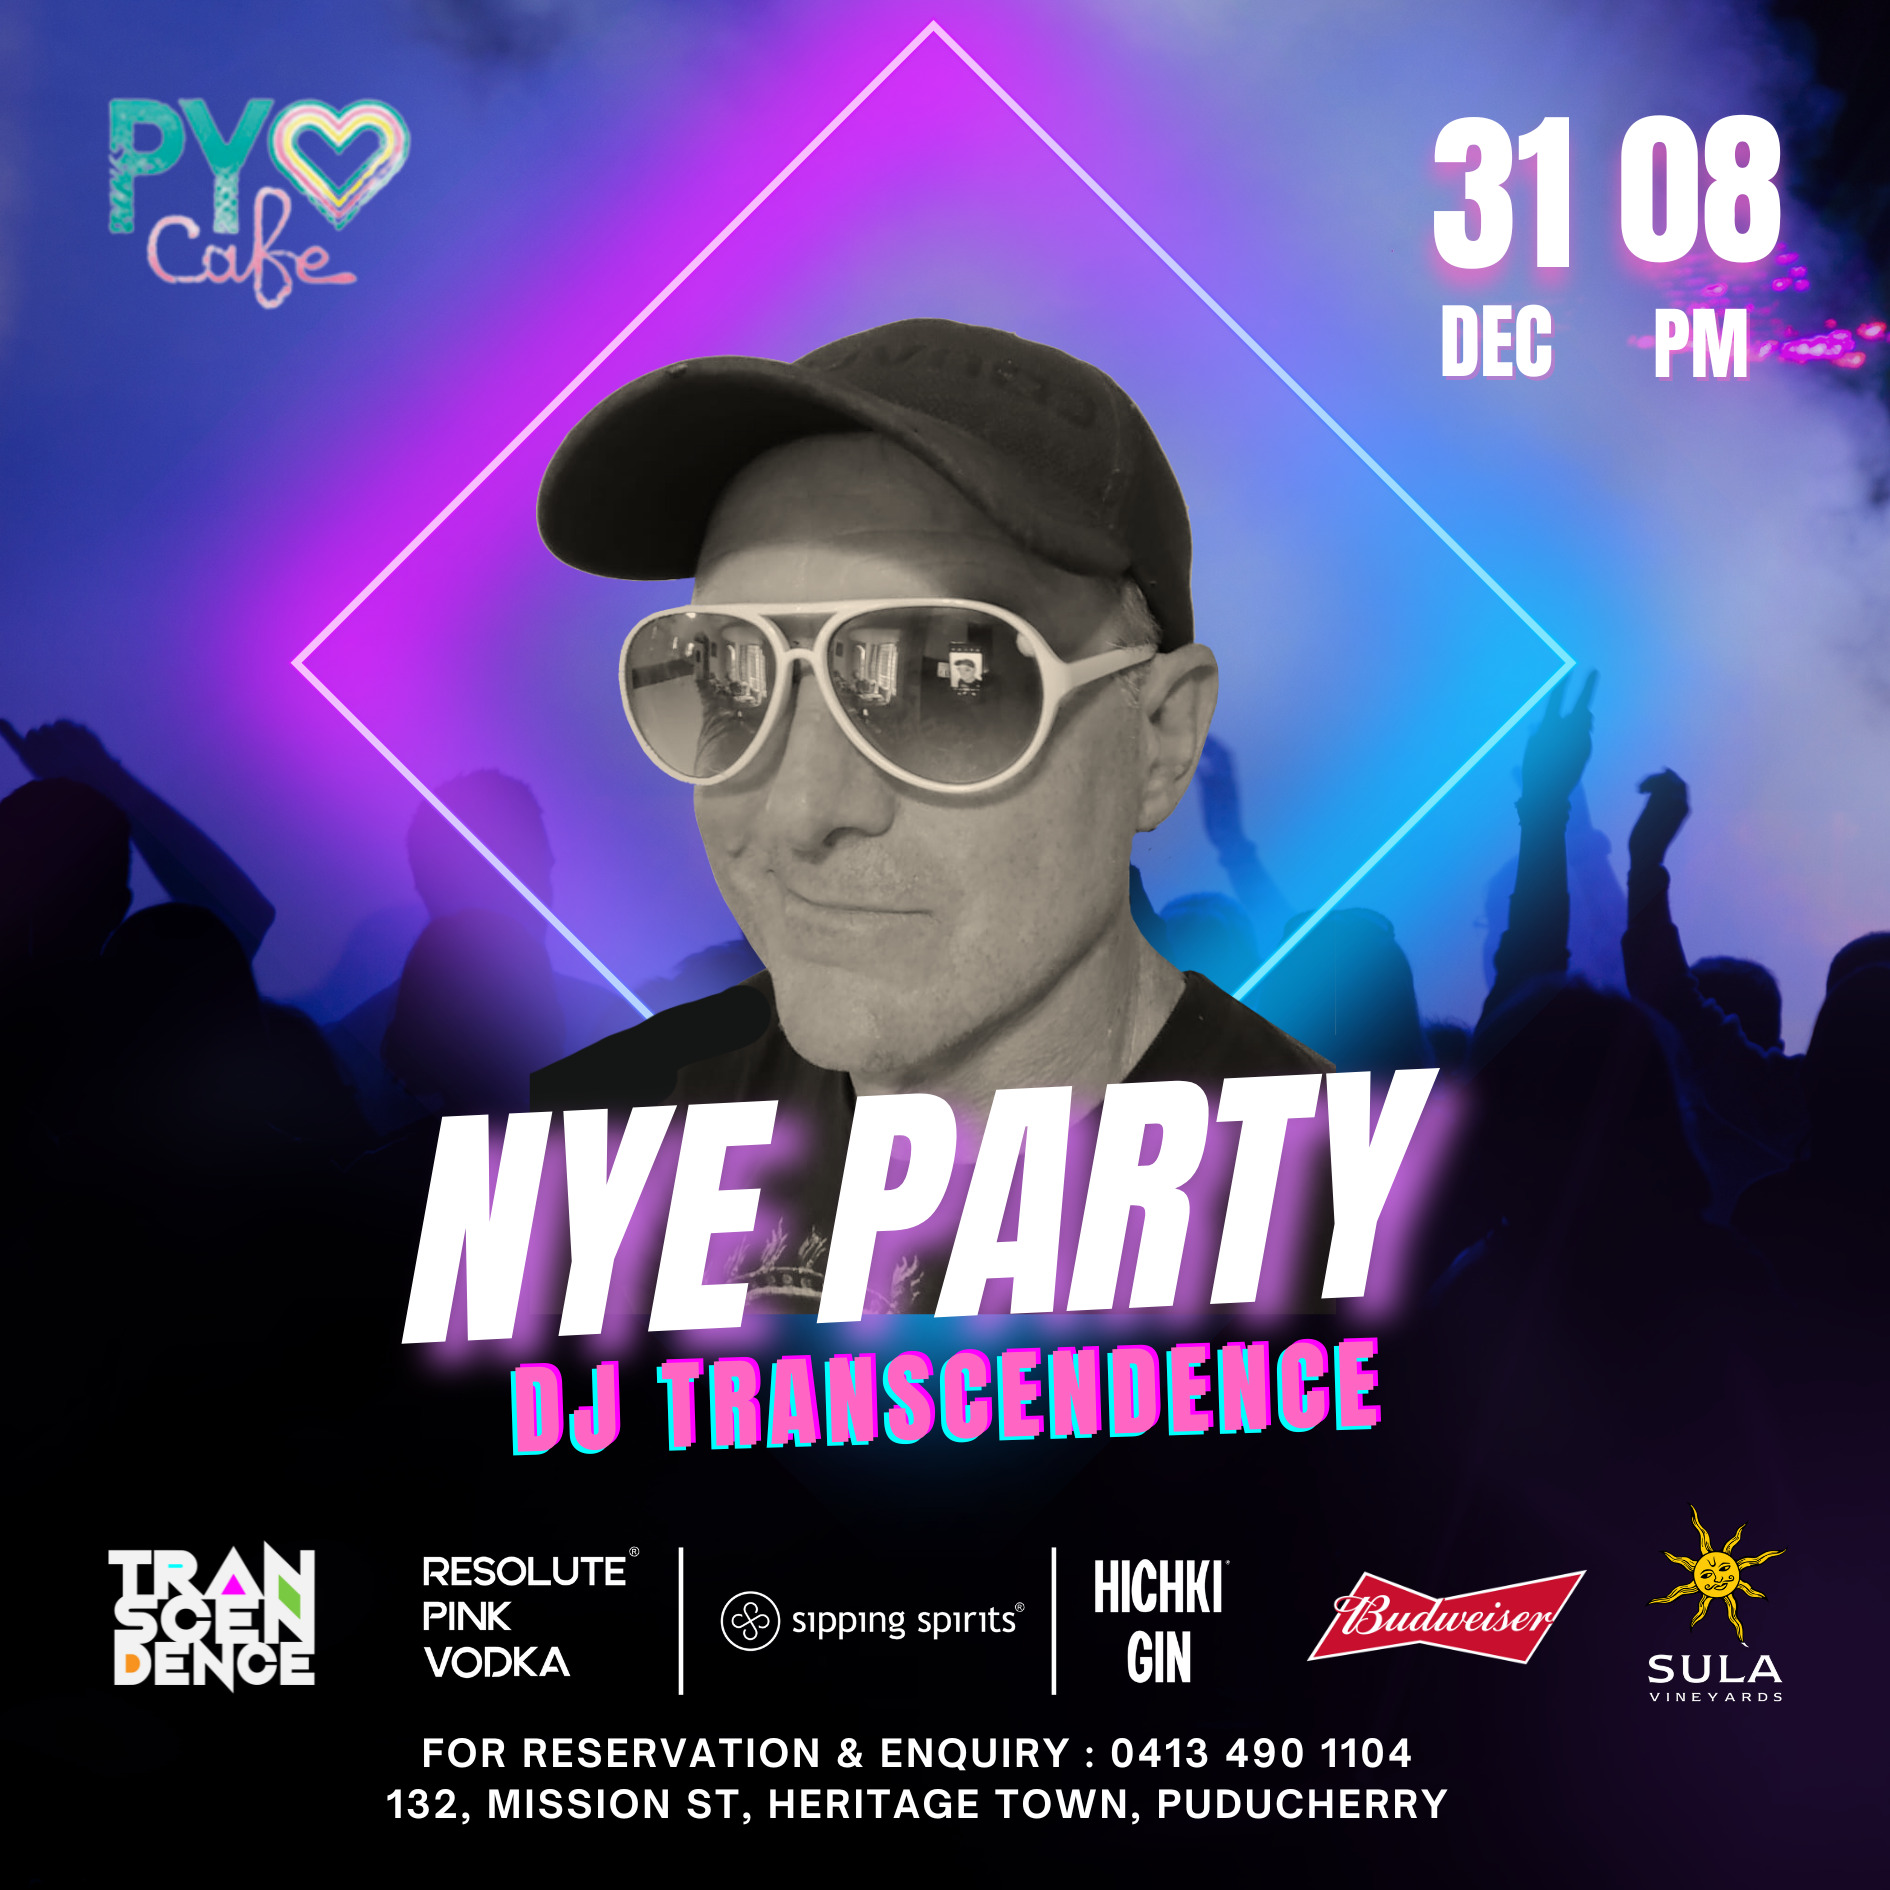 NYE party at PY Cafe with DJ Transcendence in Pondicherry